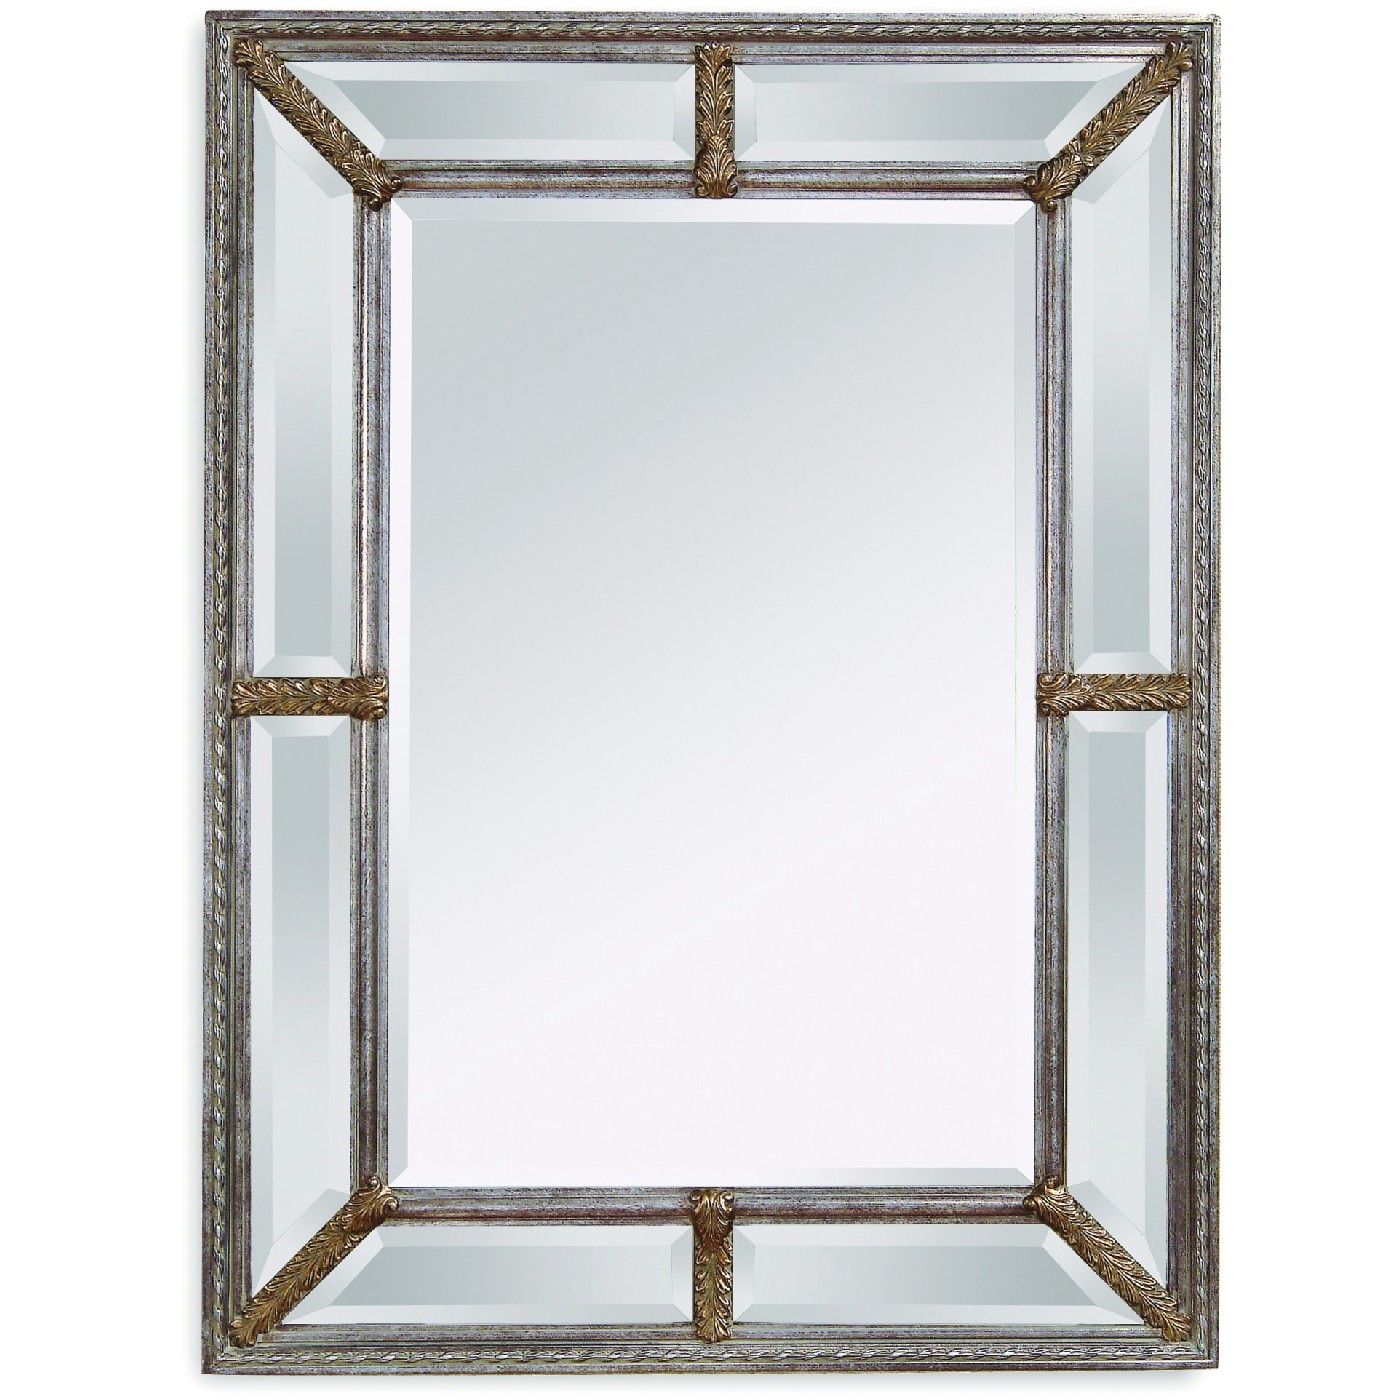 Roma Silver Leaf Traditional Wall Mirror 6357 1764Ec Intended For Butterfly Gold Leaf Wall Mirrors (View 15 of 15)